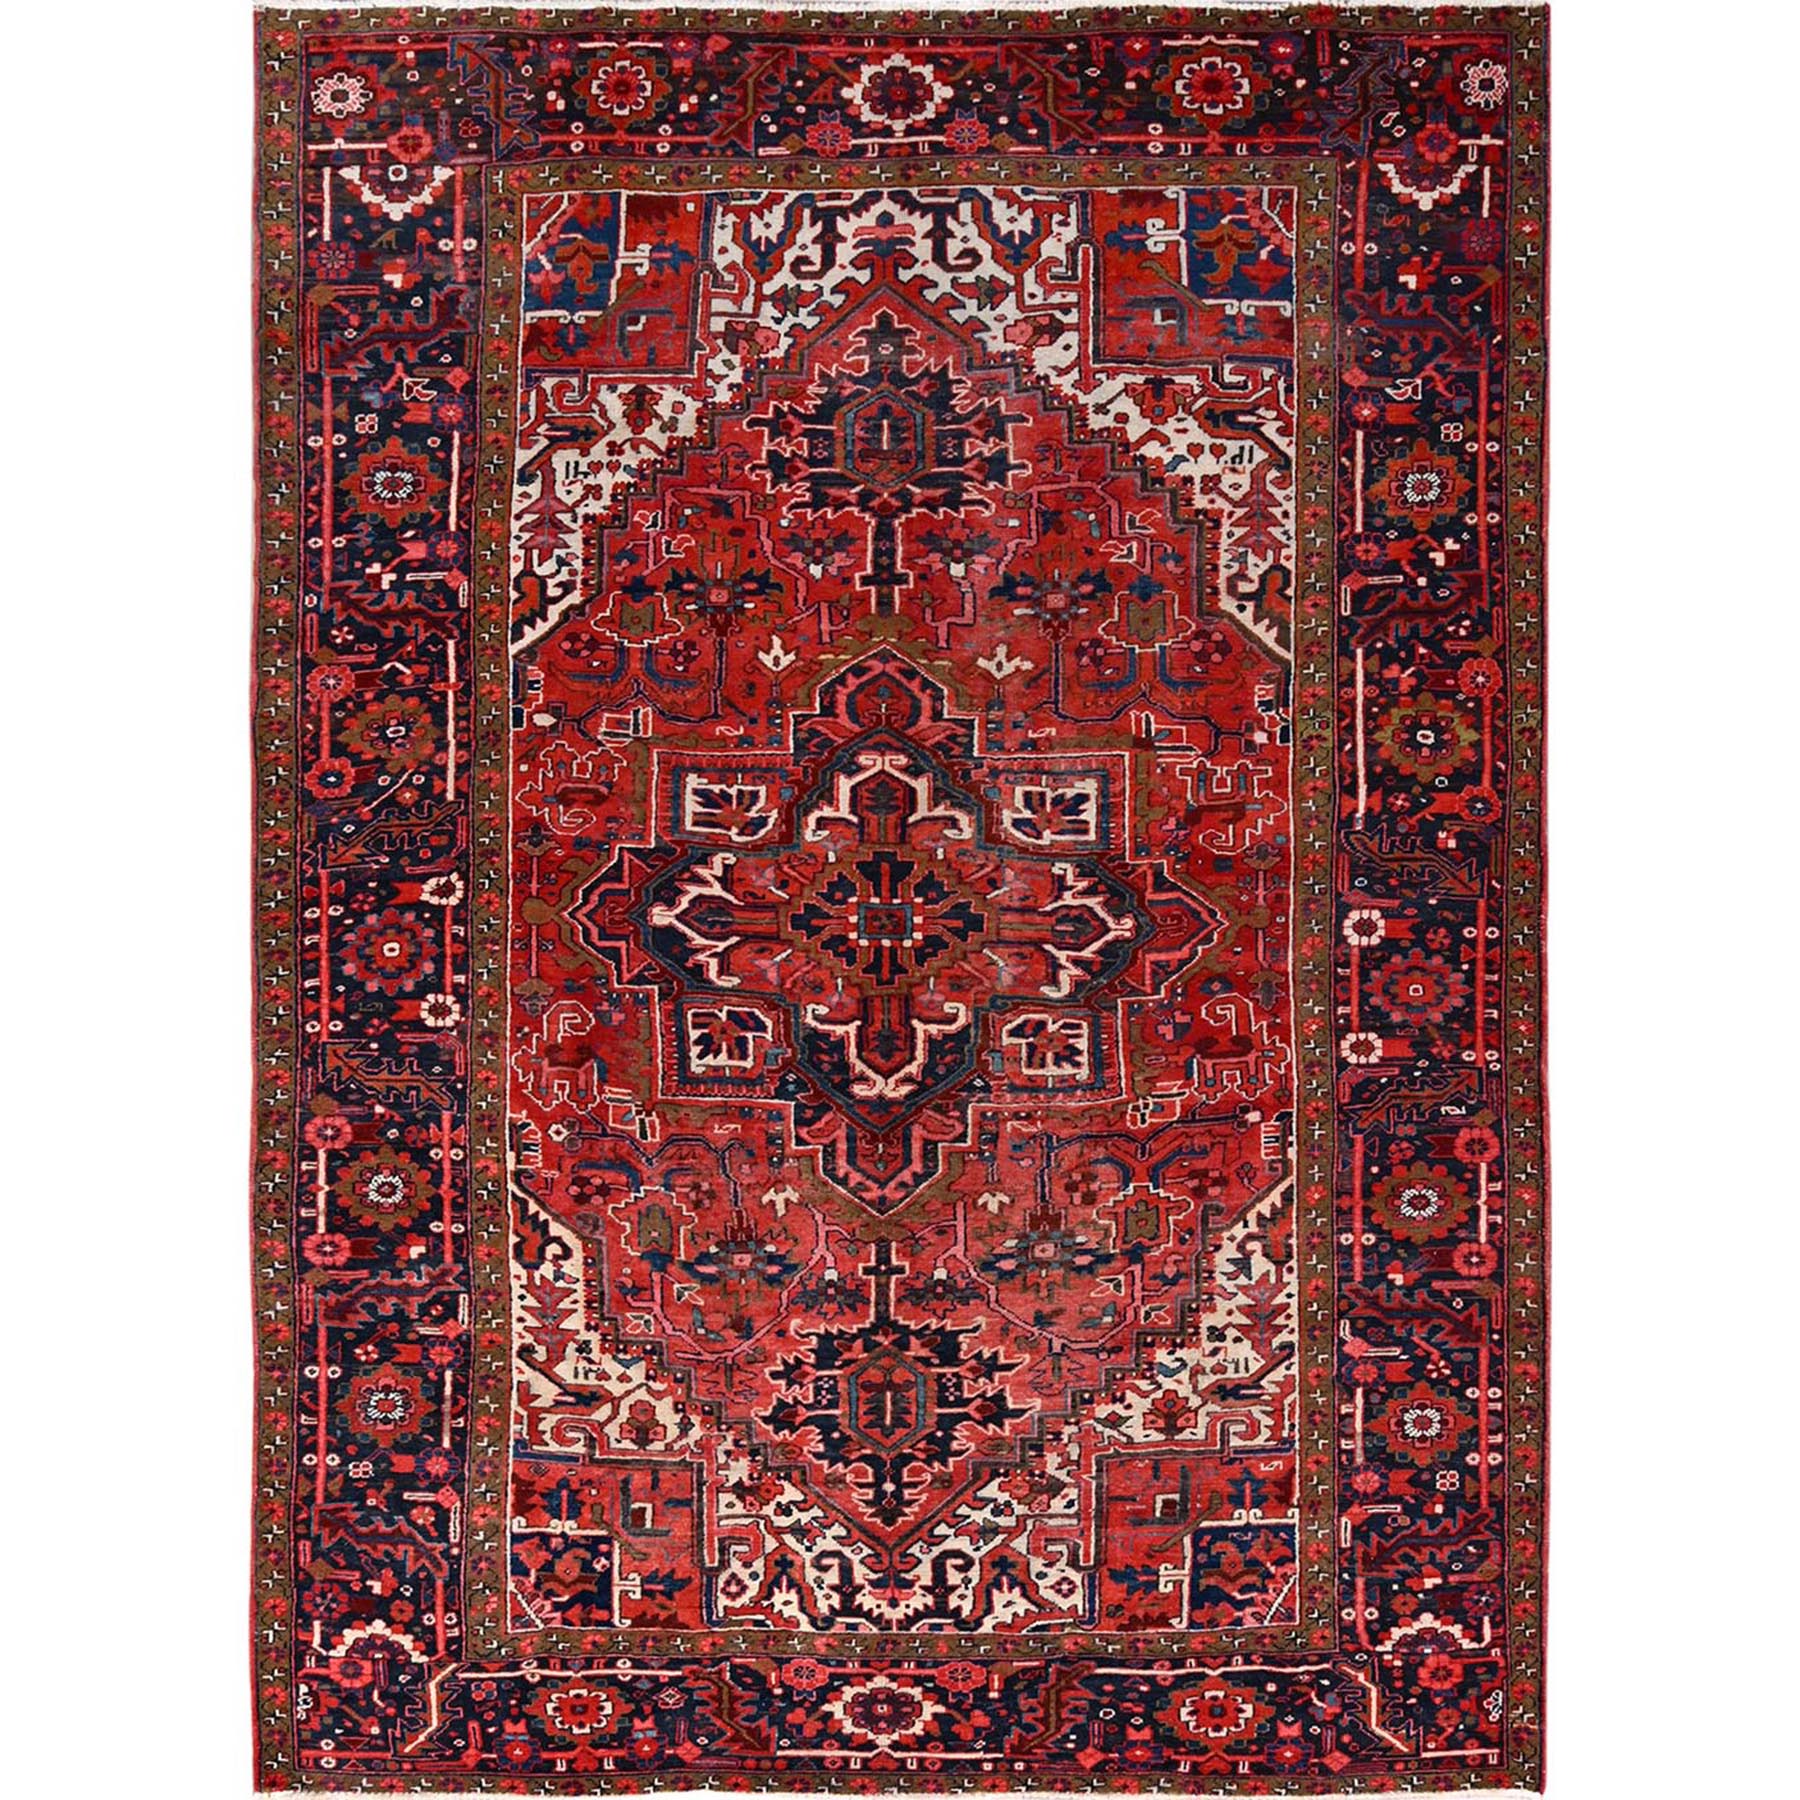  Wool Hand-Knotted Area Rug 7'11